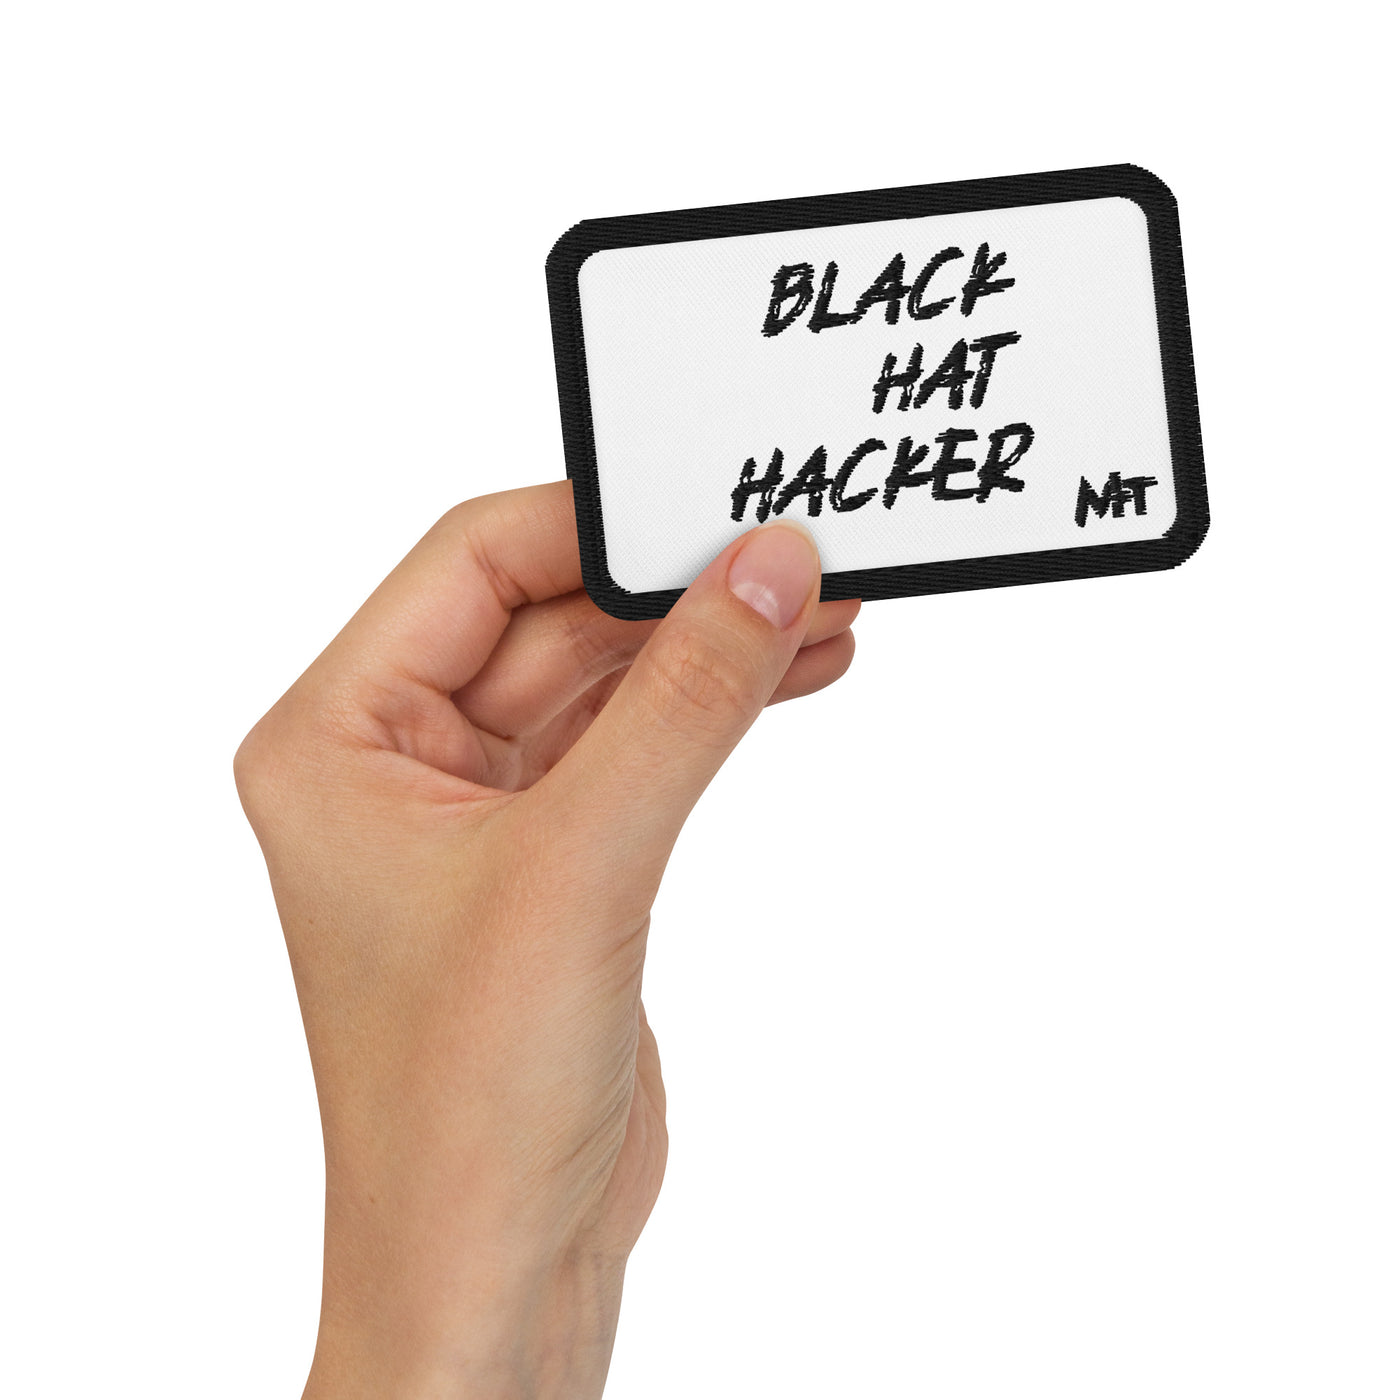 Black Hat Hacker V10 - Embroidered patches